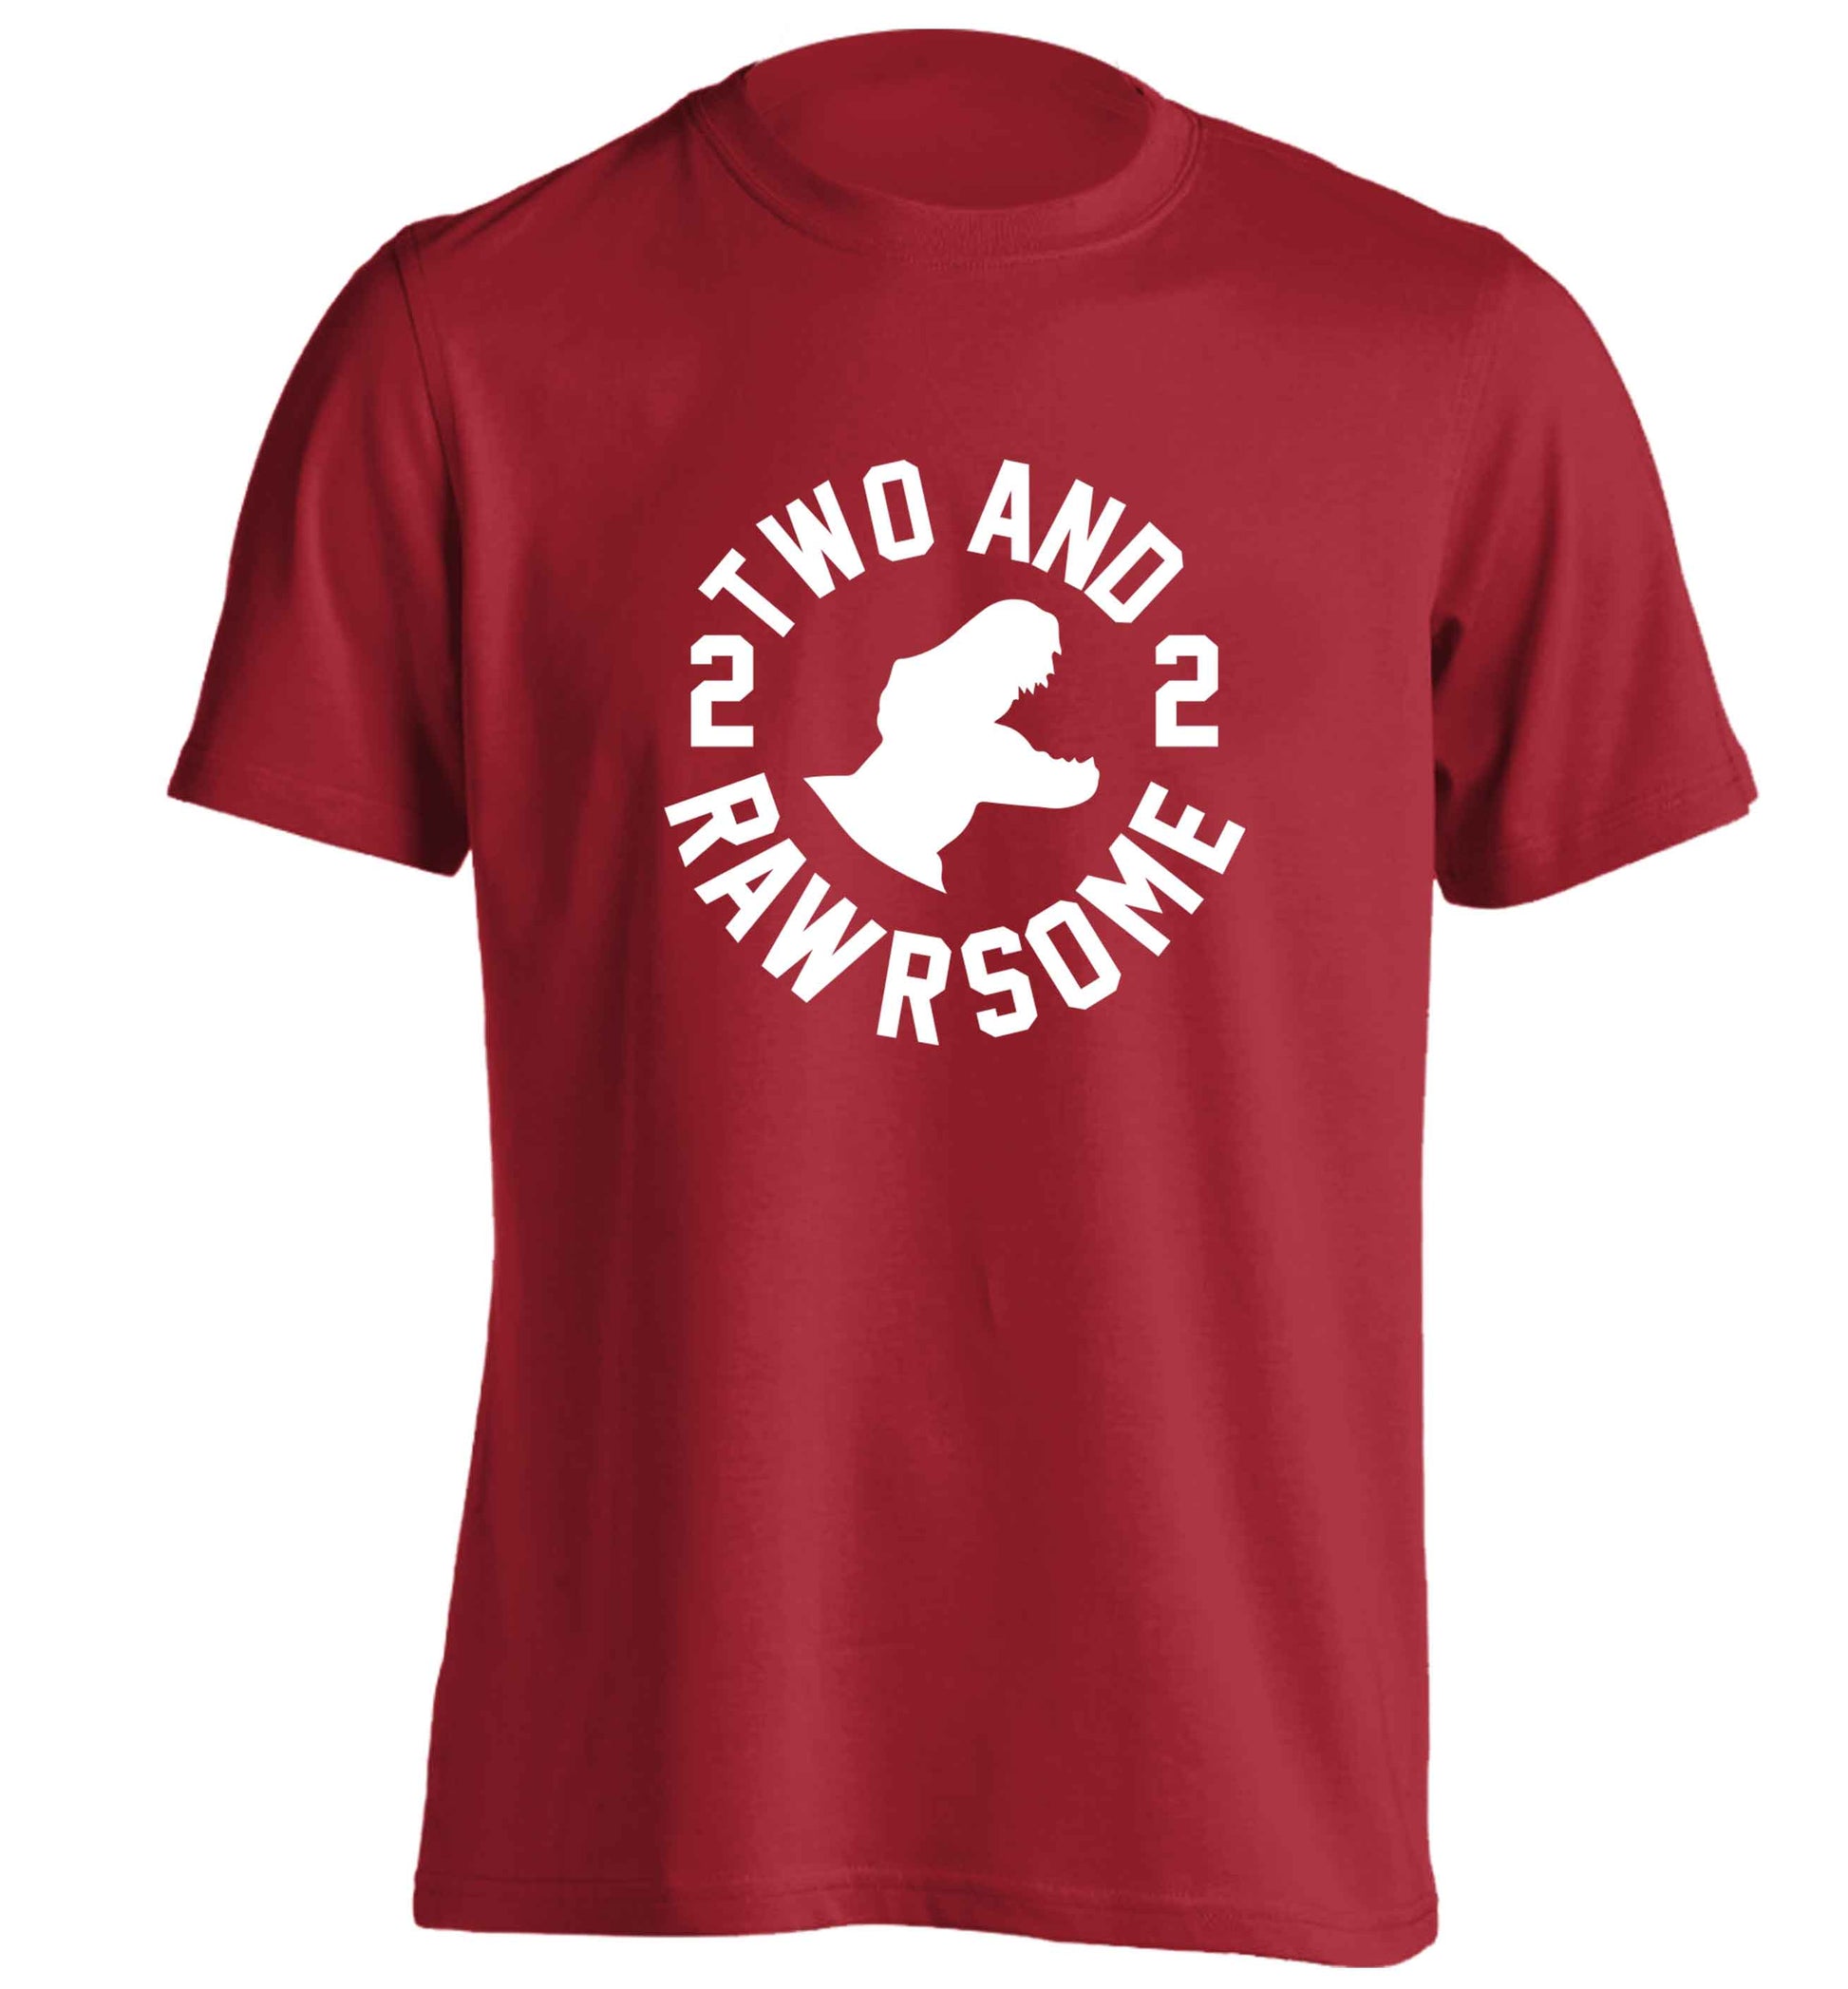 Two and rawrsome adults unisex red Tshirt 2XL